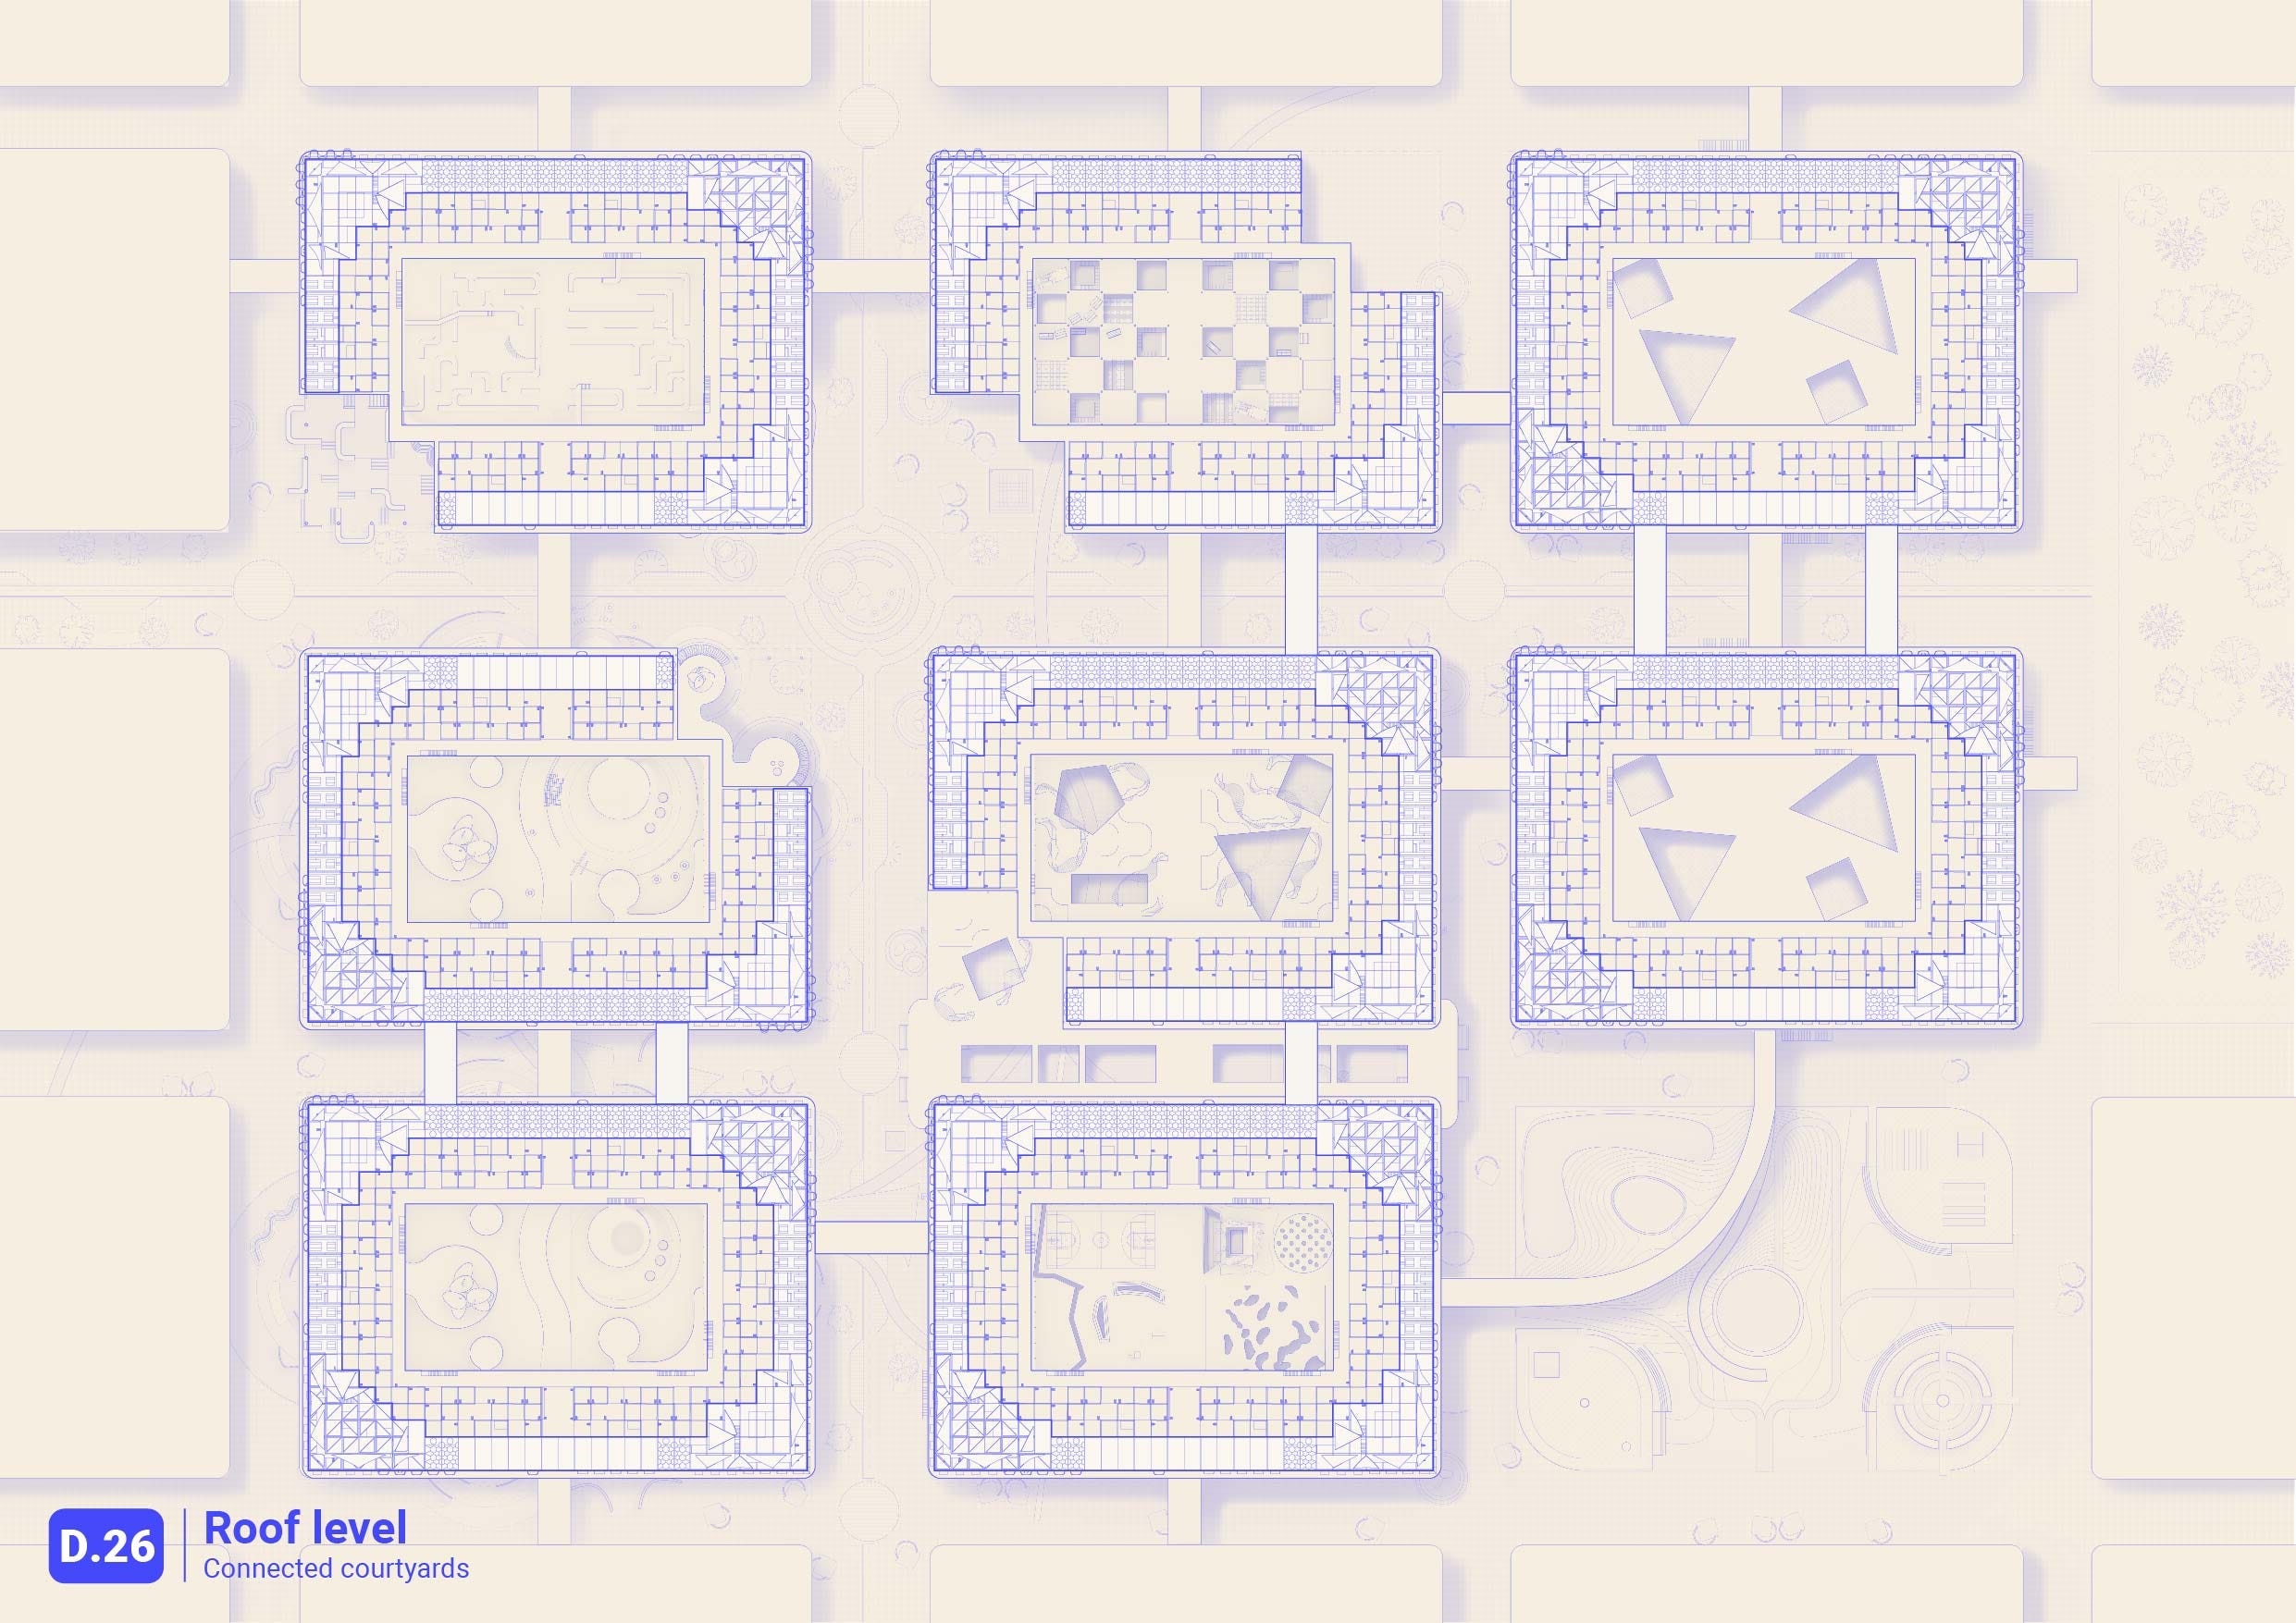 Floor plans of the roofs of nine city blocks with connecting bridges.